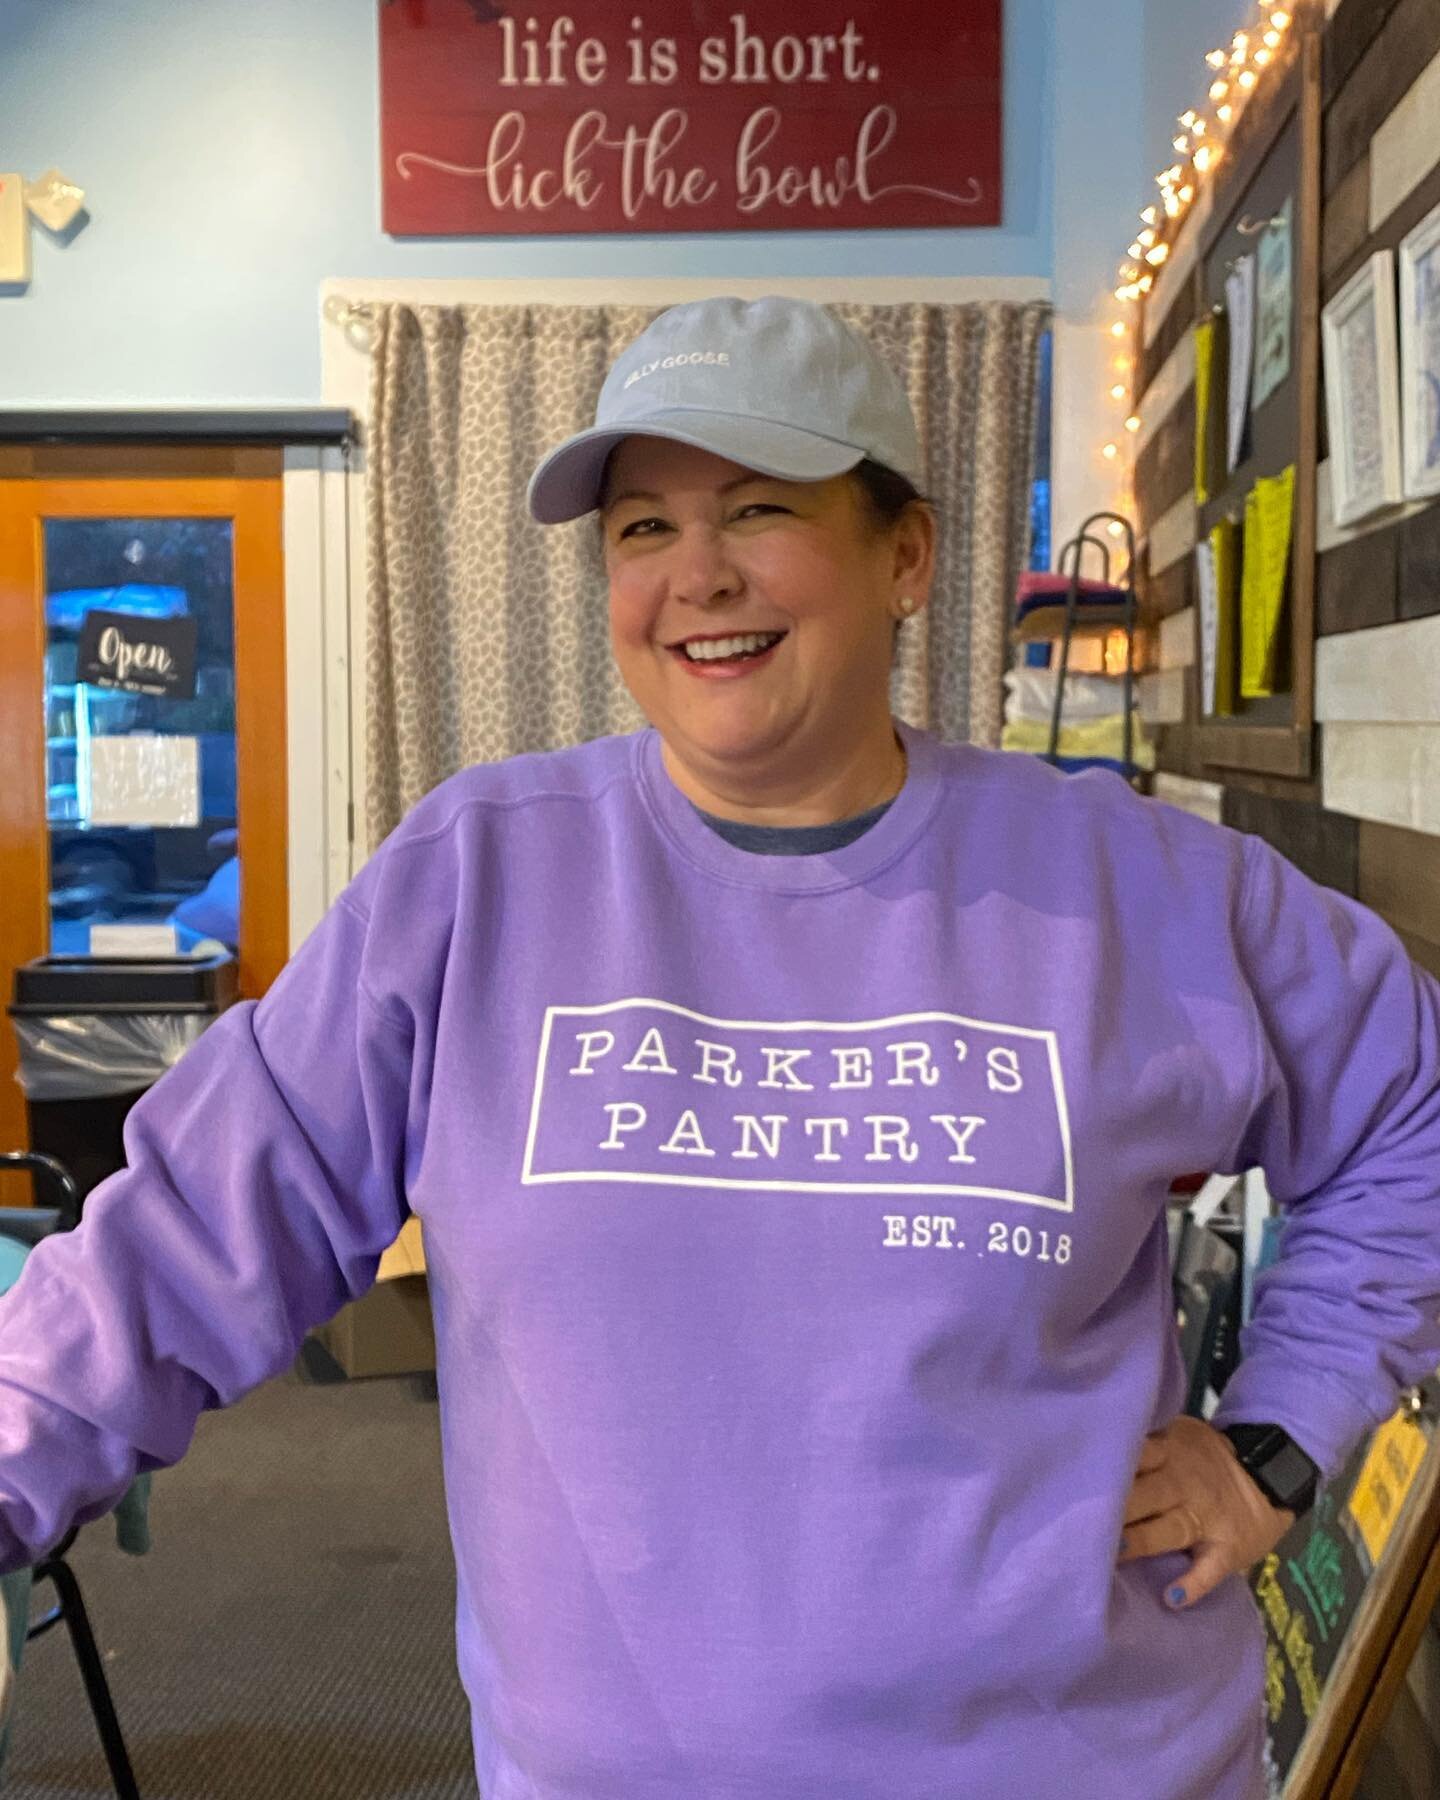 Parkers Pantry new sweatshirts ❤️